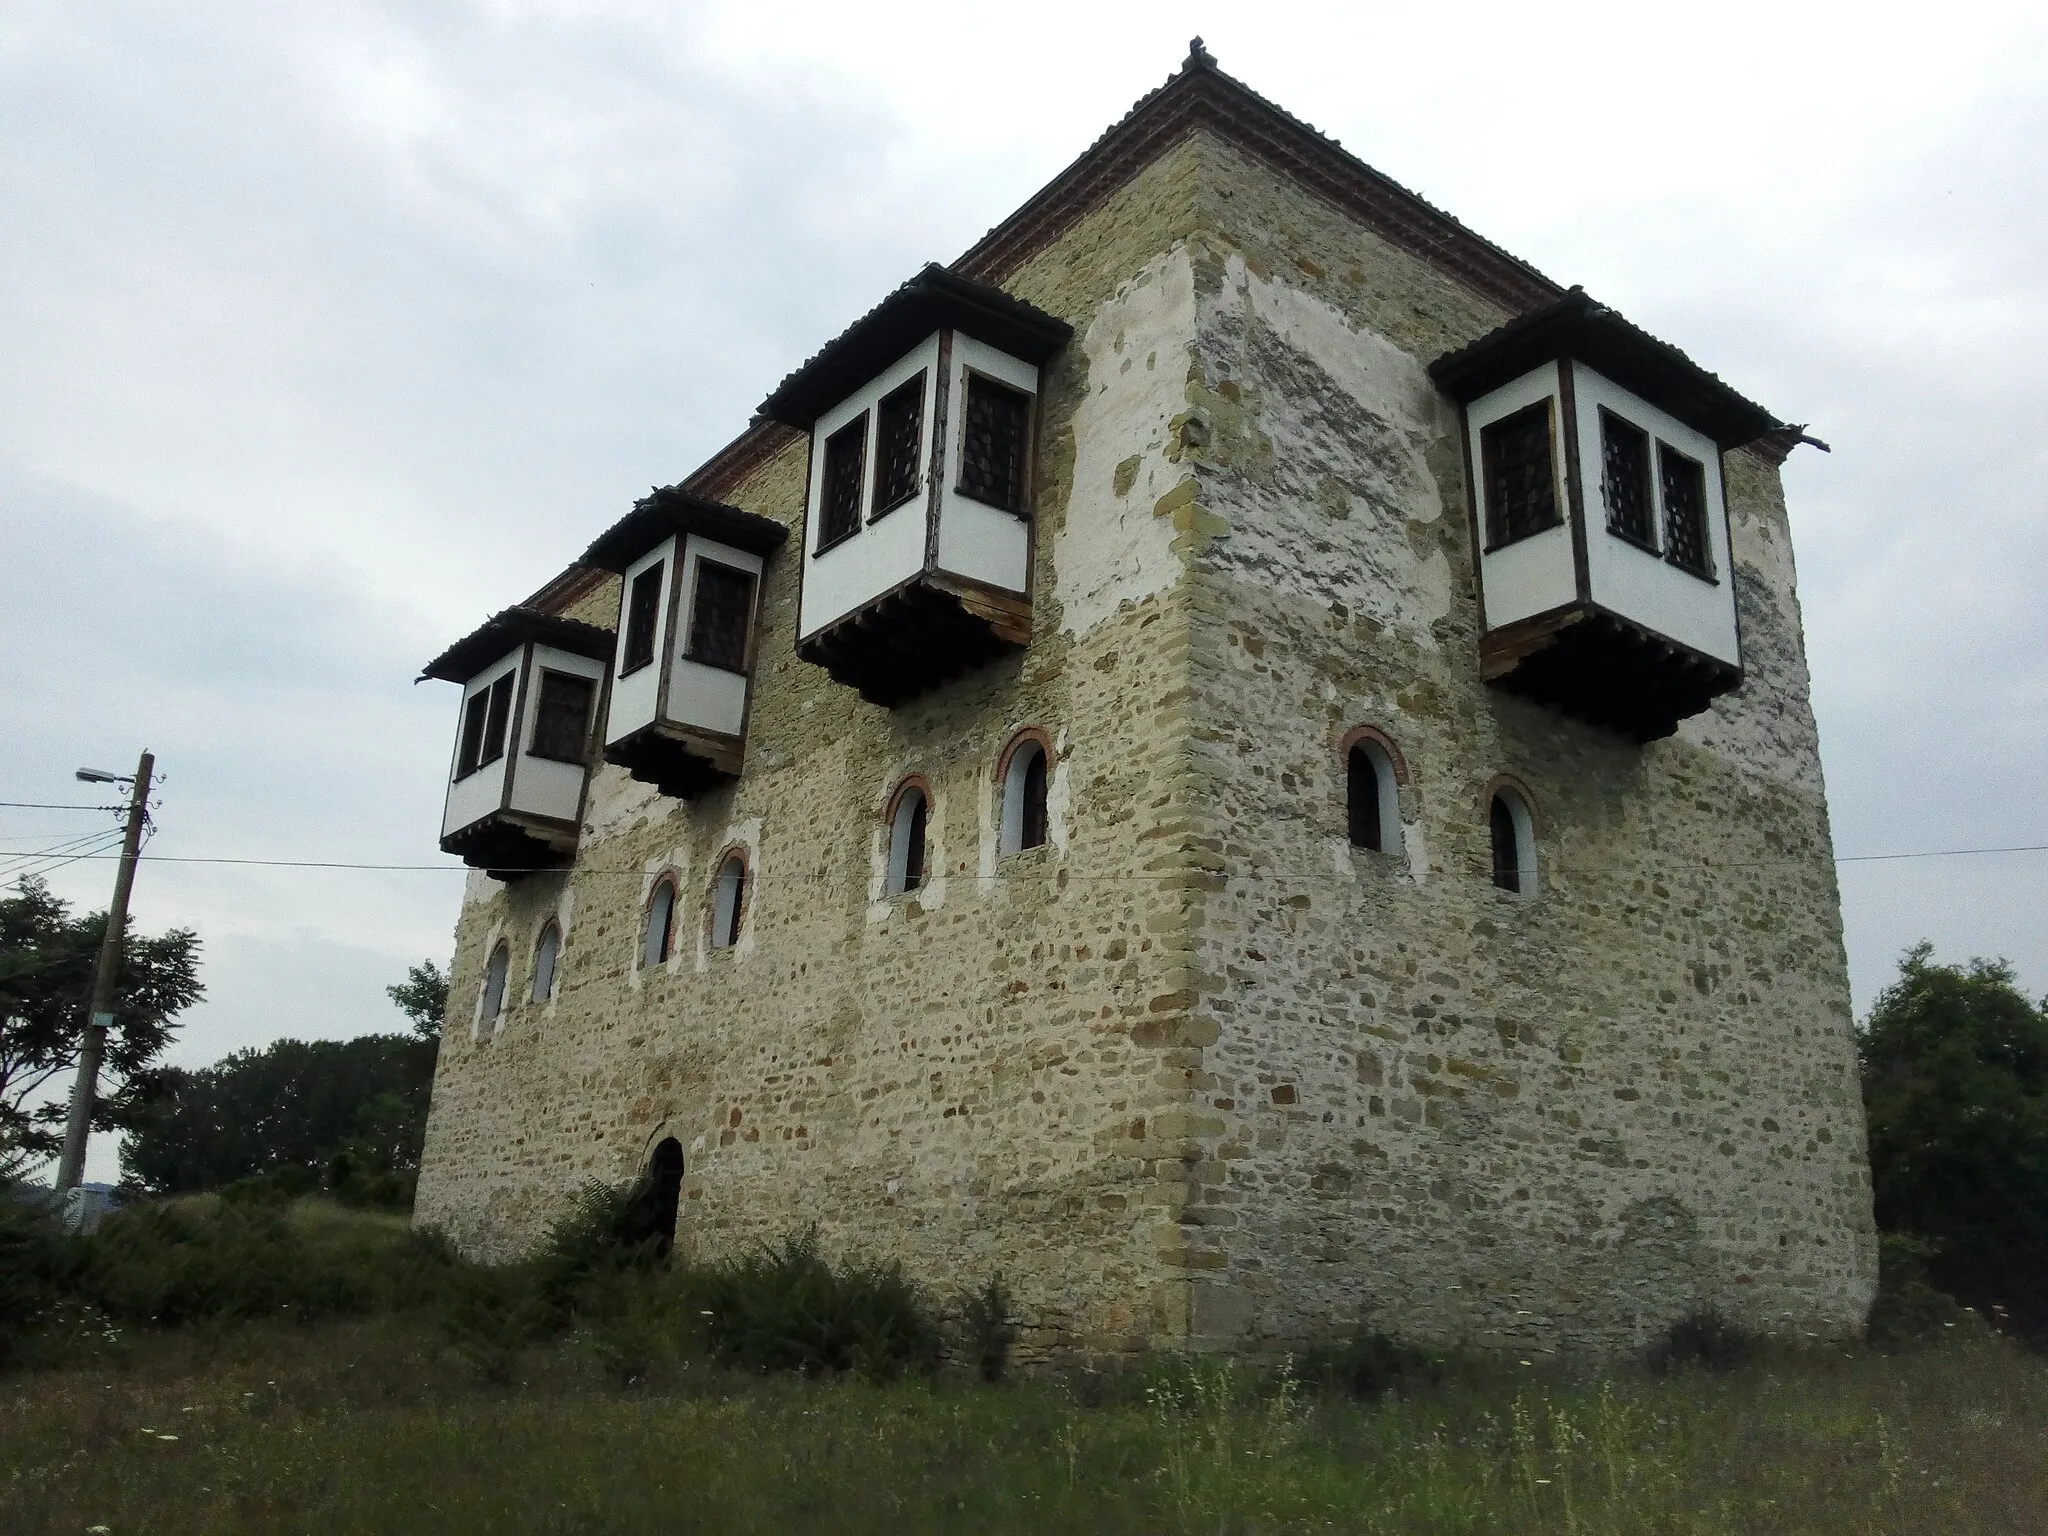 Photo showing: Shemshi Bay's tower, also known as the tower of Ledenik, is a XVII century building in the village of Ledenik. It is a landmark and a popular tourist attraction.